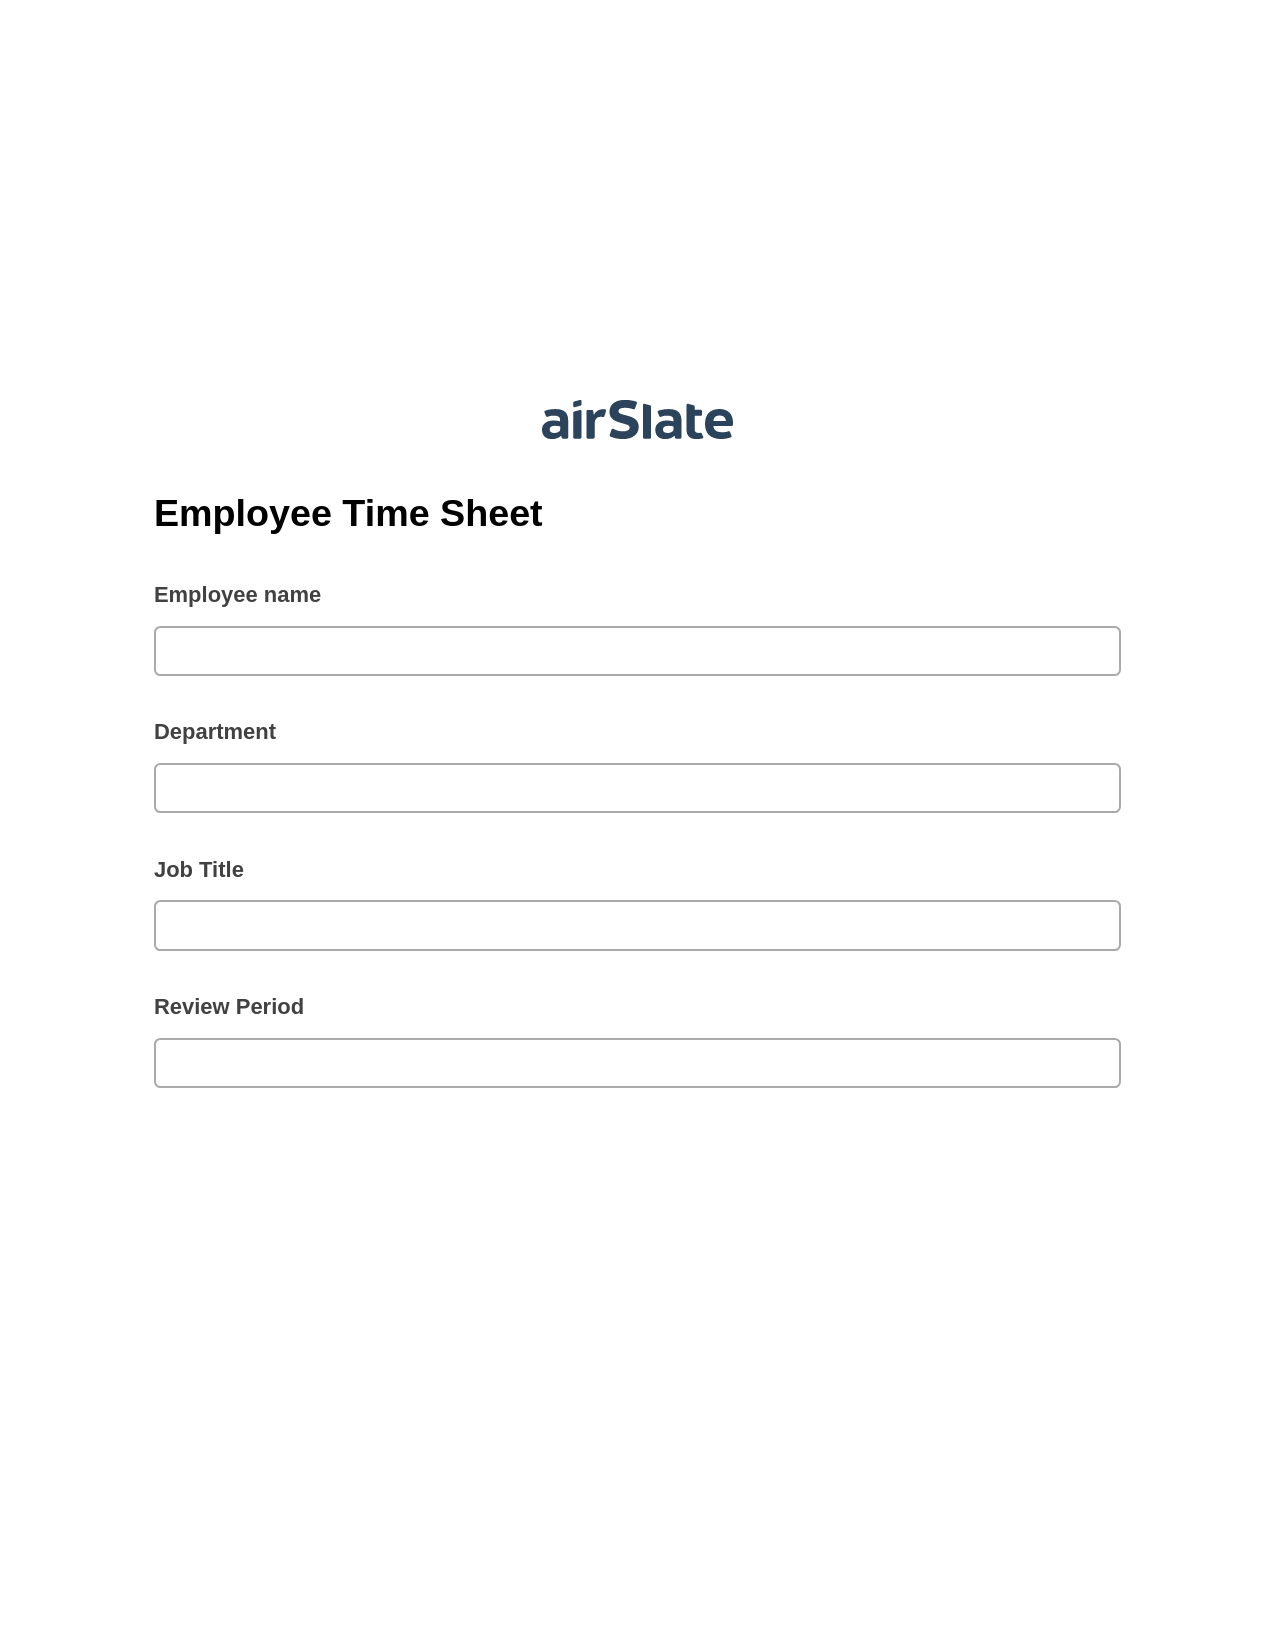 Multirole Employee Time Sheet Pre-fill Document Bot, Create Salesforce Records Bot, Export to Salesforce Record Bot